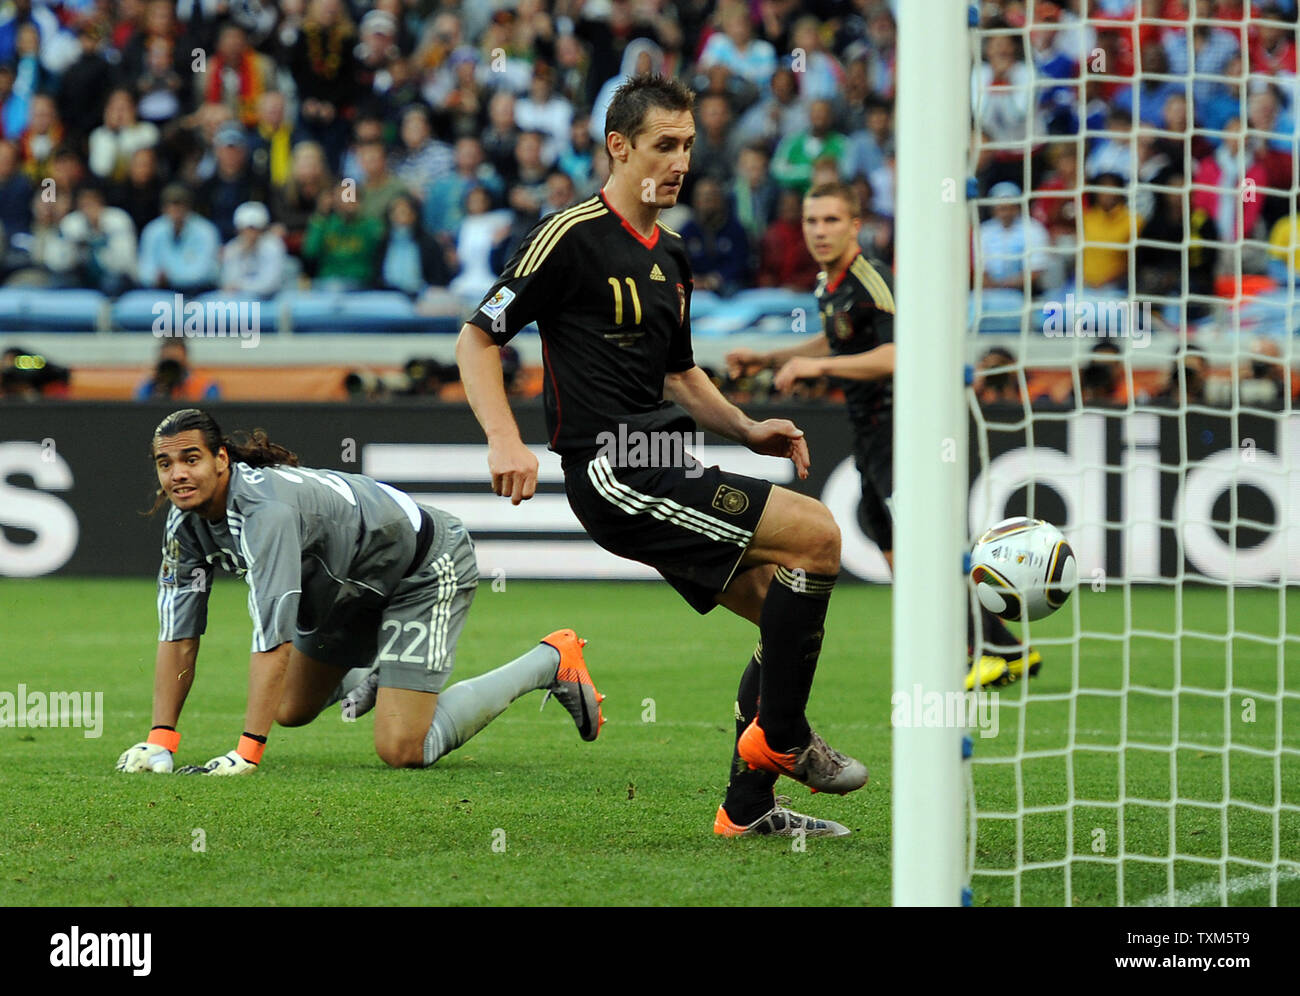 Miroslav Klose of Germany scores his team's second goal during the FIFA World Cup Quarter Final match at the Green Point Stadium in Cape Town, South Africa on July 3, 2010. UPI/Chris Brunskill Stock Photo